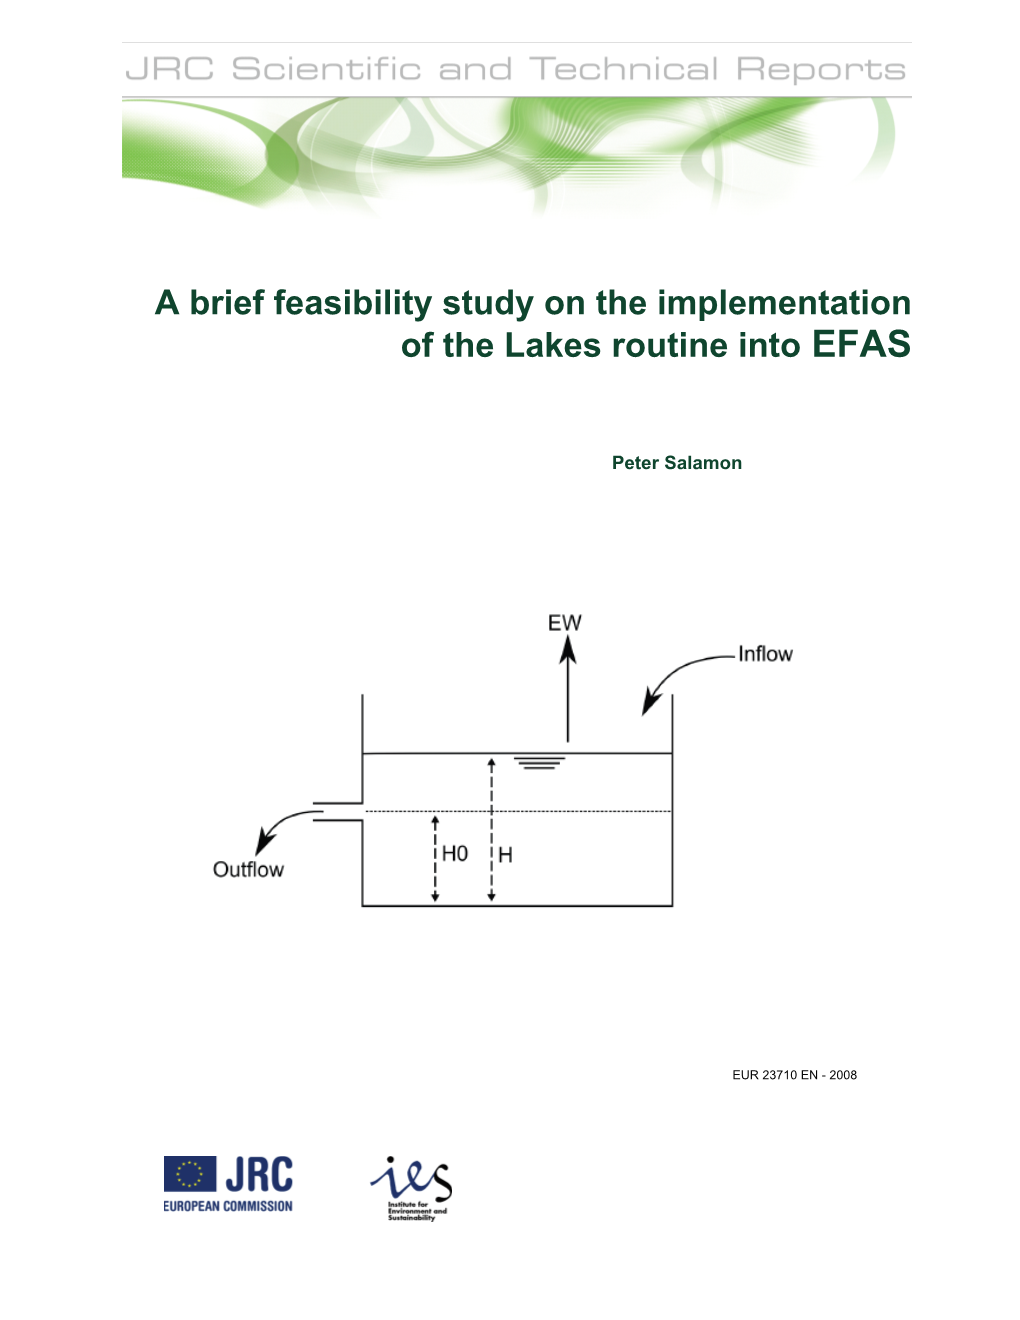 A Brief Feasibility Study on the Implementation of the Lakes Routine